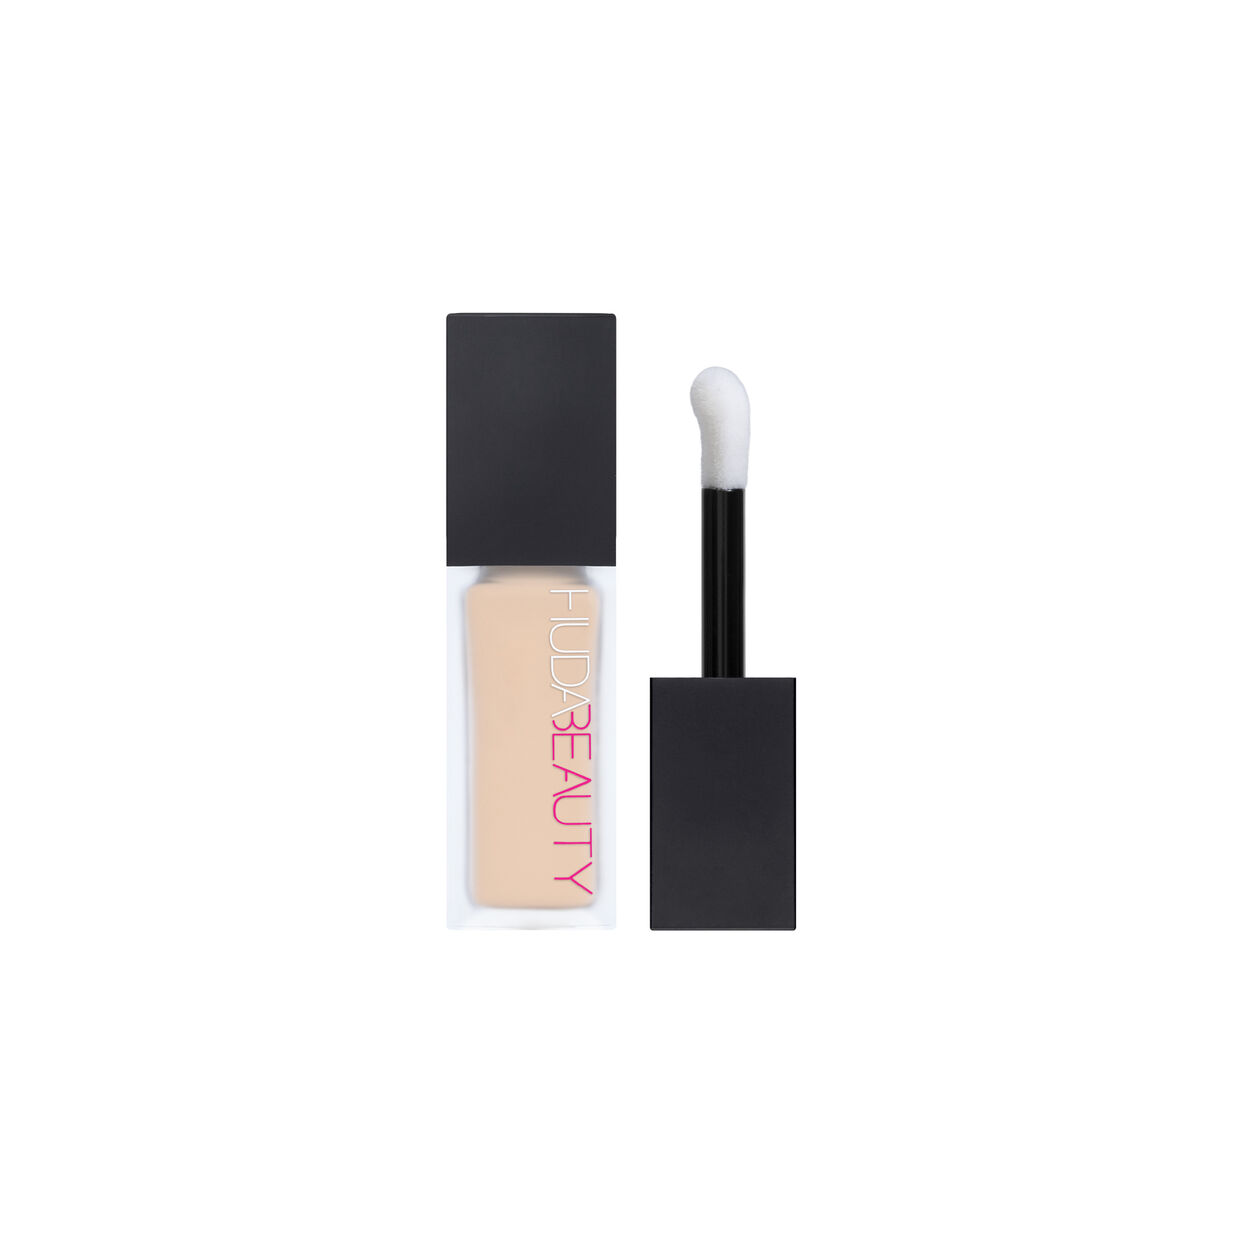 #FauxFilter Luminous Matte Buildable Coverage Crease Proof Concealer | HUDA BEAUTY